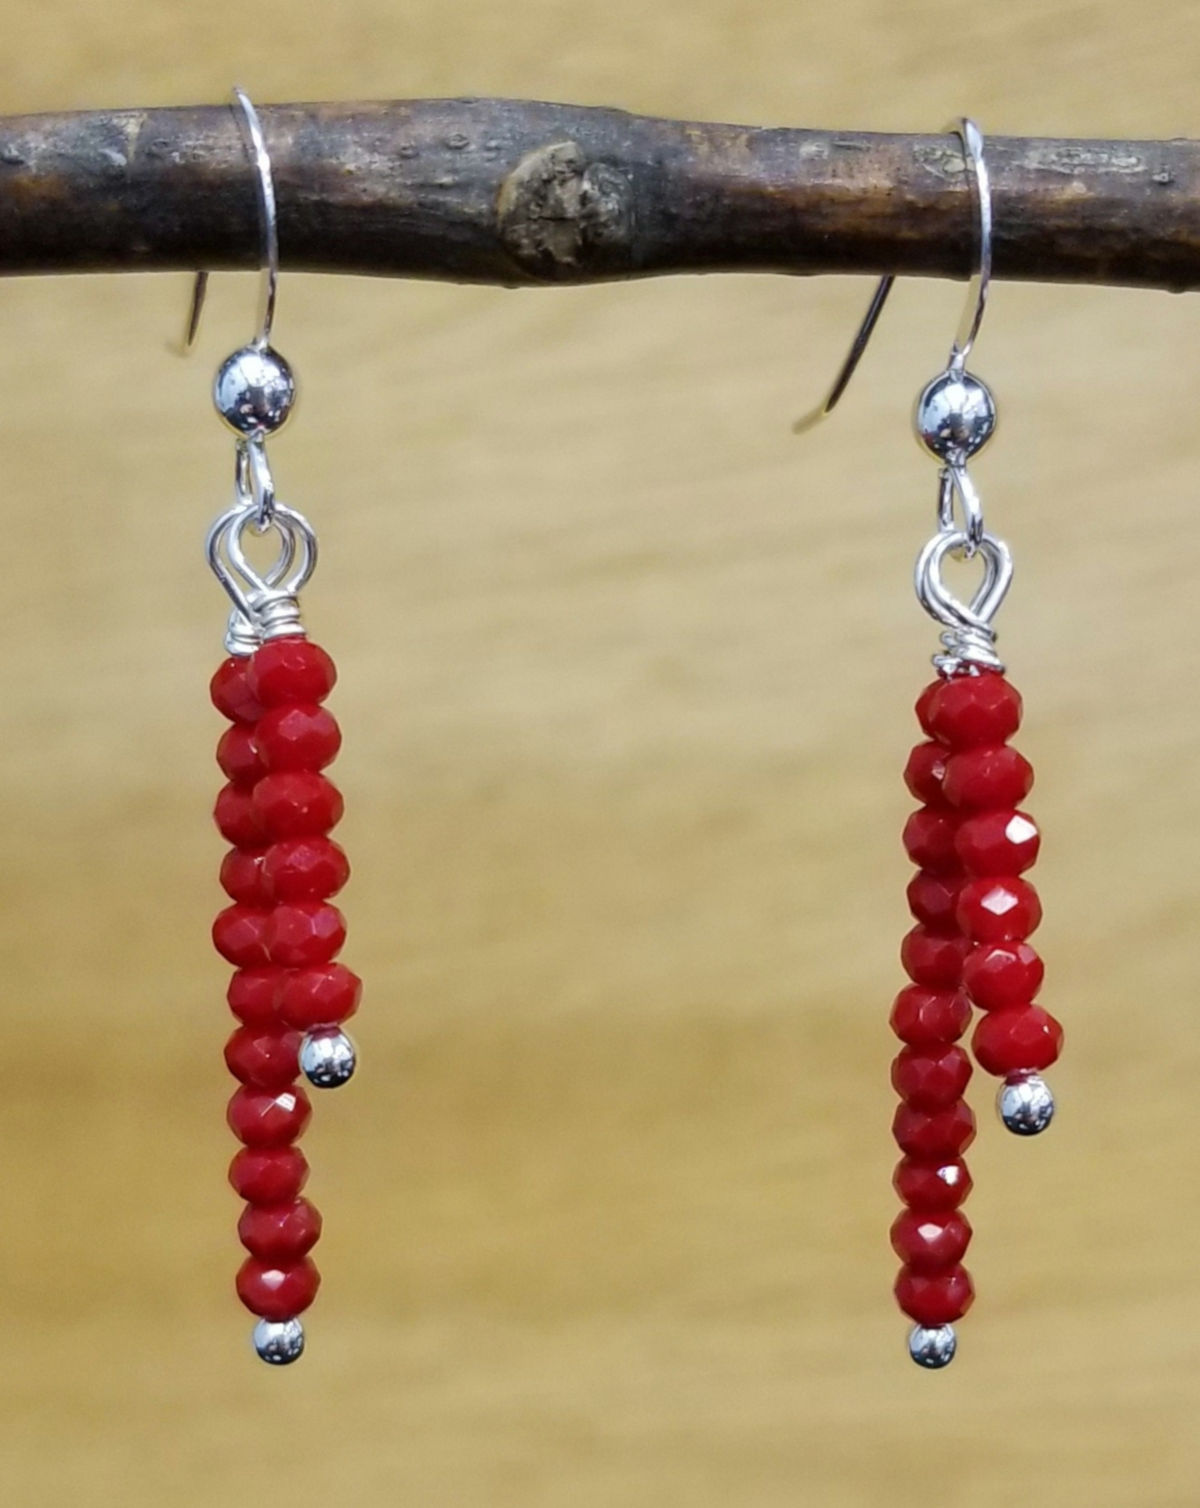 Round Bead and Wire Earrings